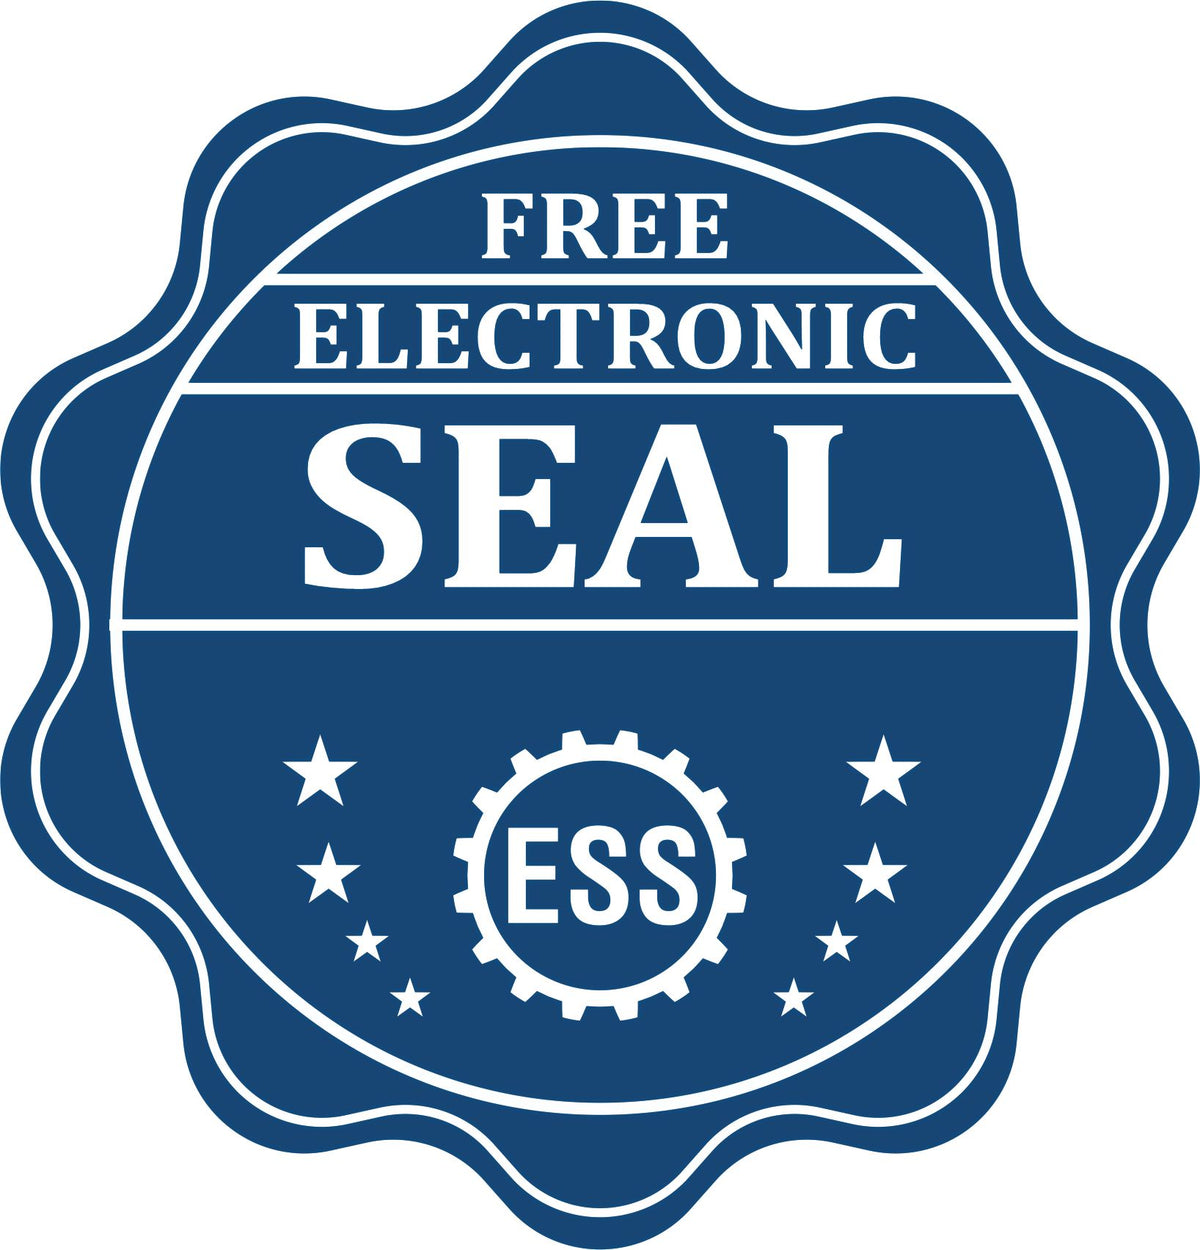 A badge showing a free electronic seal for the Handheld Illinois Professional Geologist Embosser with stars and the ESS gear on the emblem.